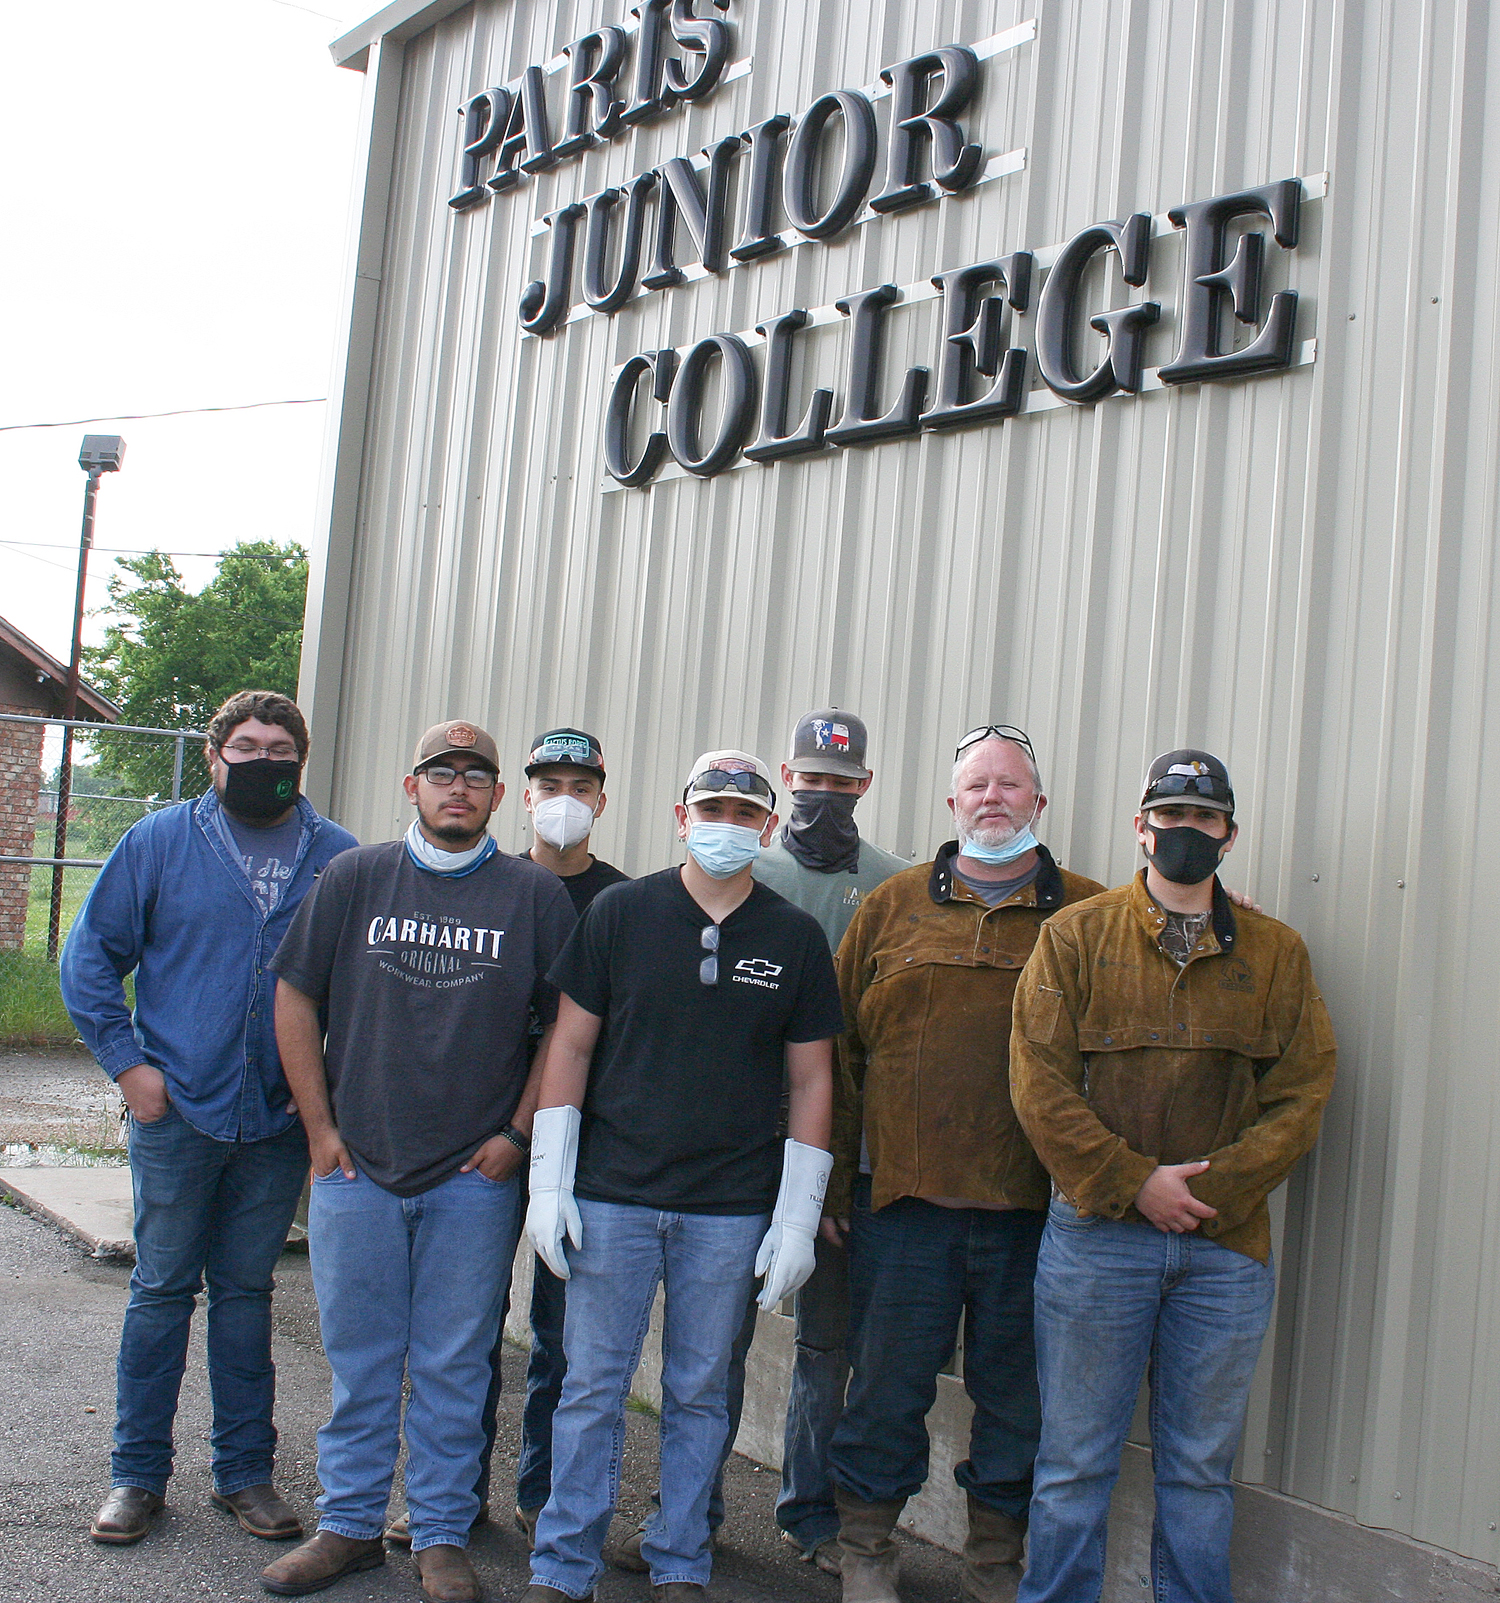 PJC-Sulphur Springs Center Night Welding Class Students Pass Certification Projects